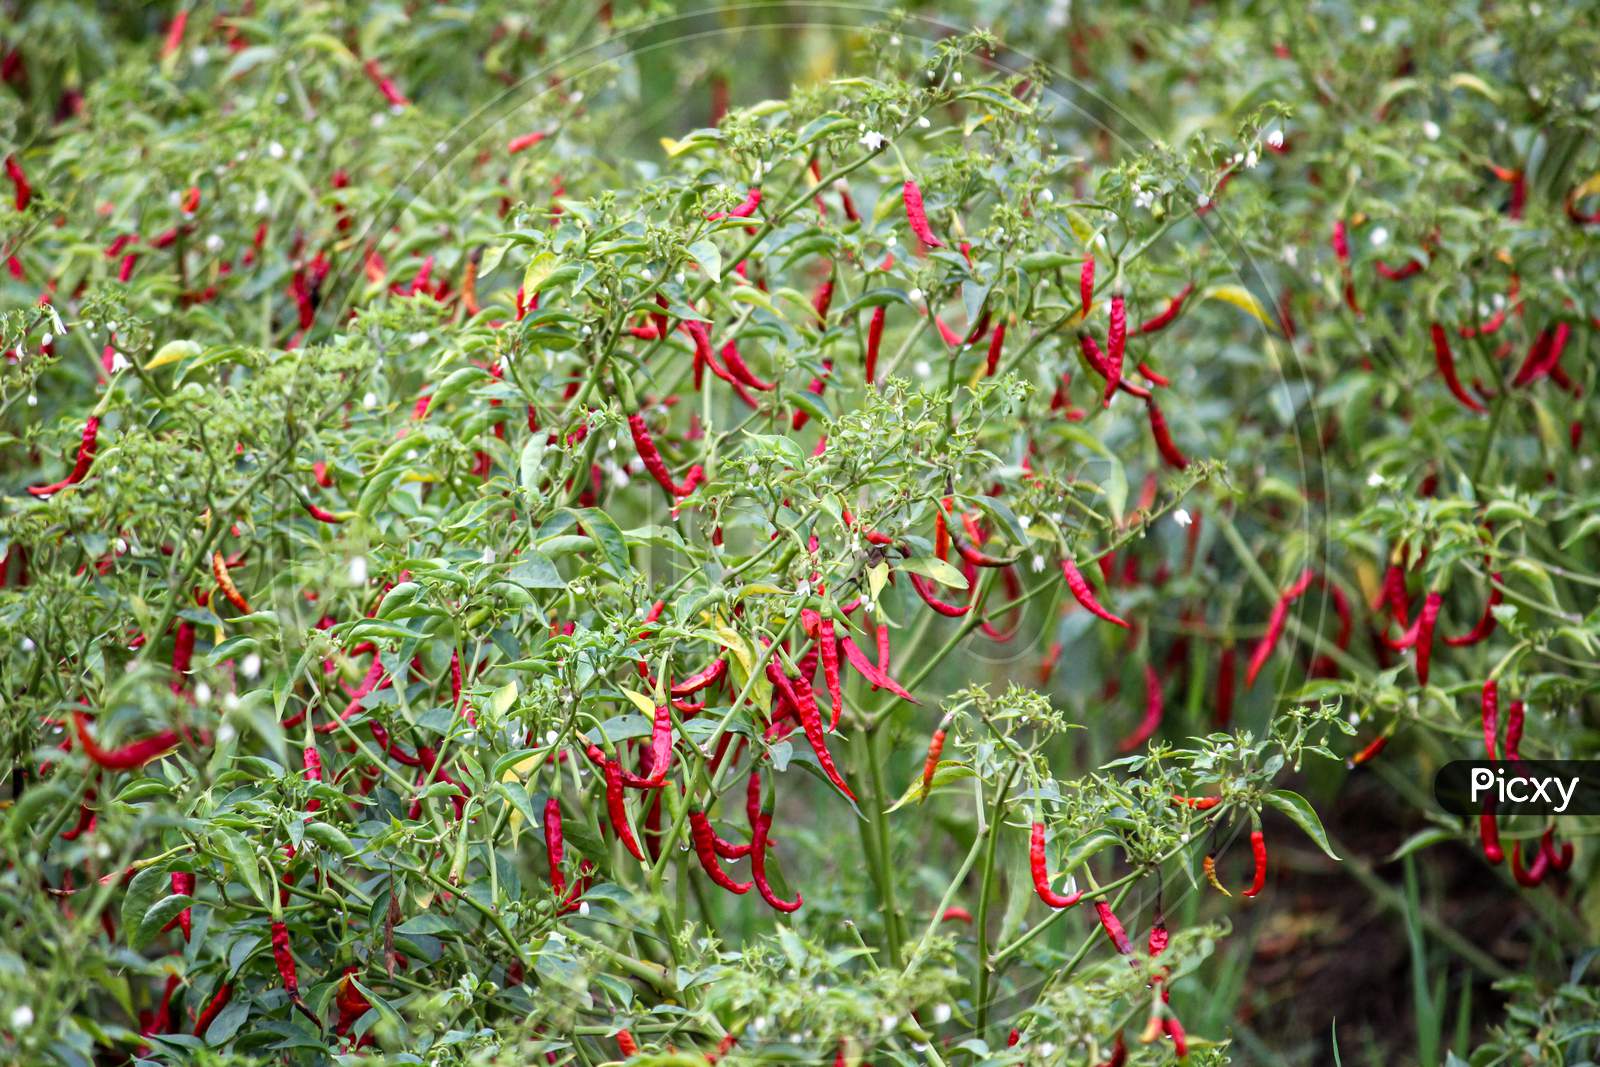 Red Chilli Fields With Red Chilli Hanging From Chilli Plants